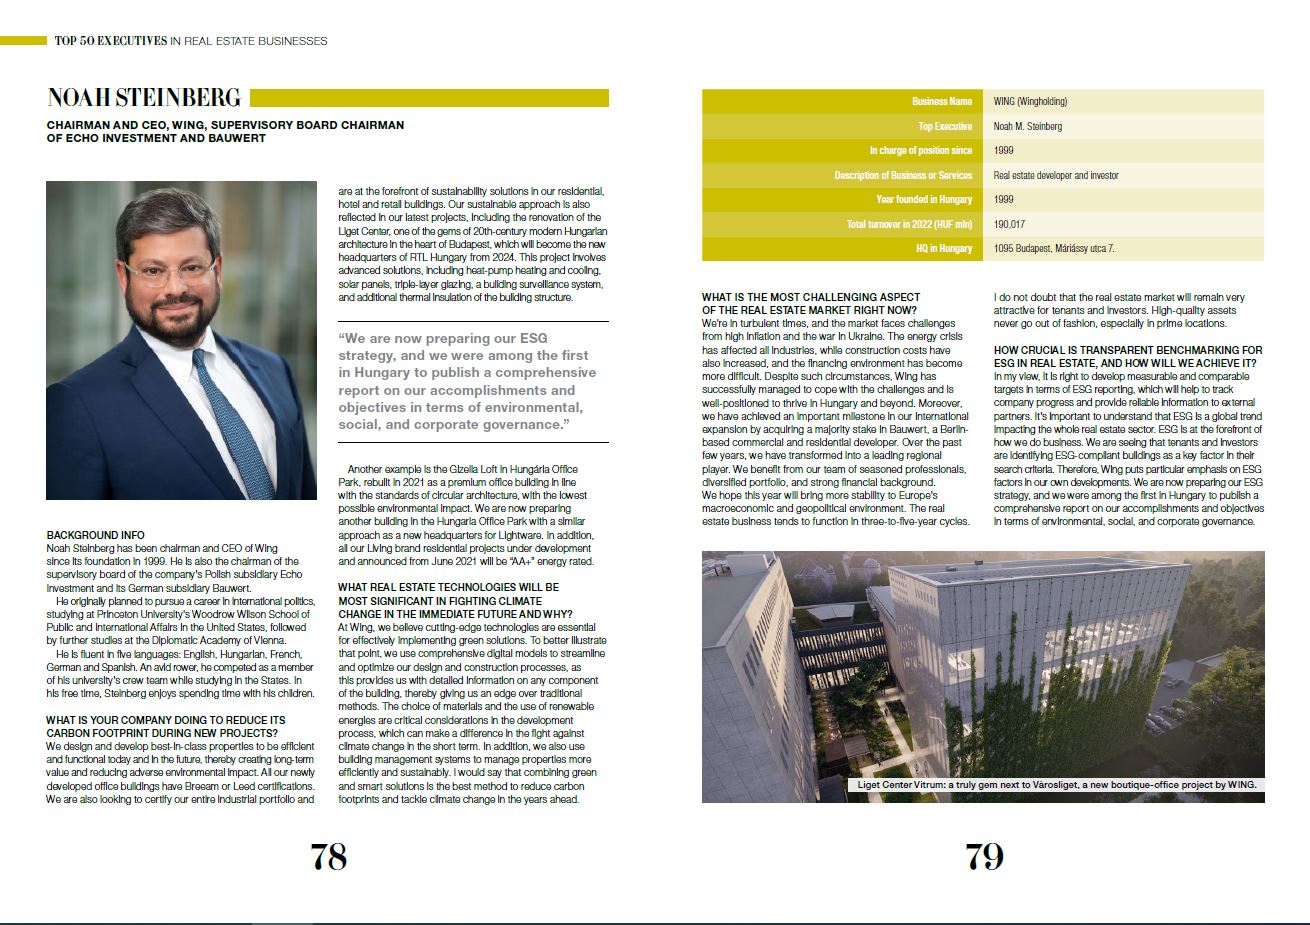 Noah Steinberg - Top 50 Executives in Real Estate Businesses 2023